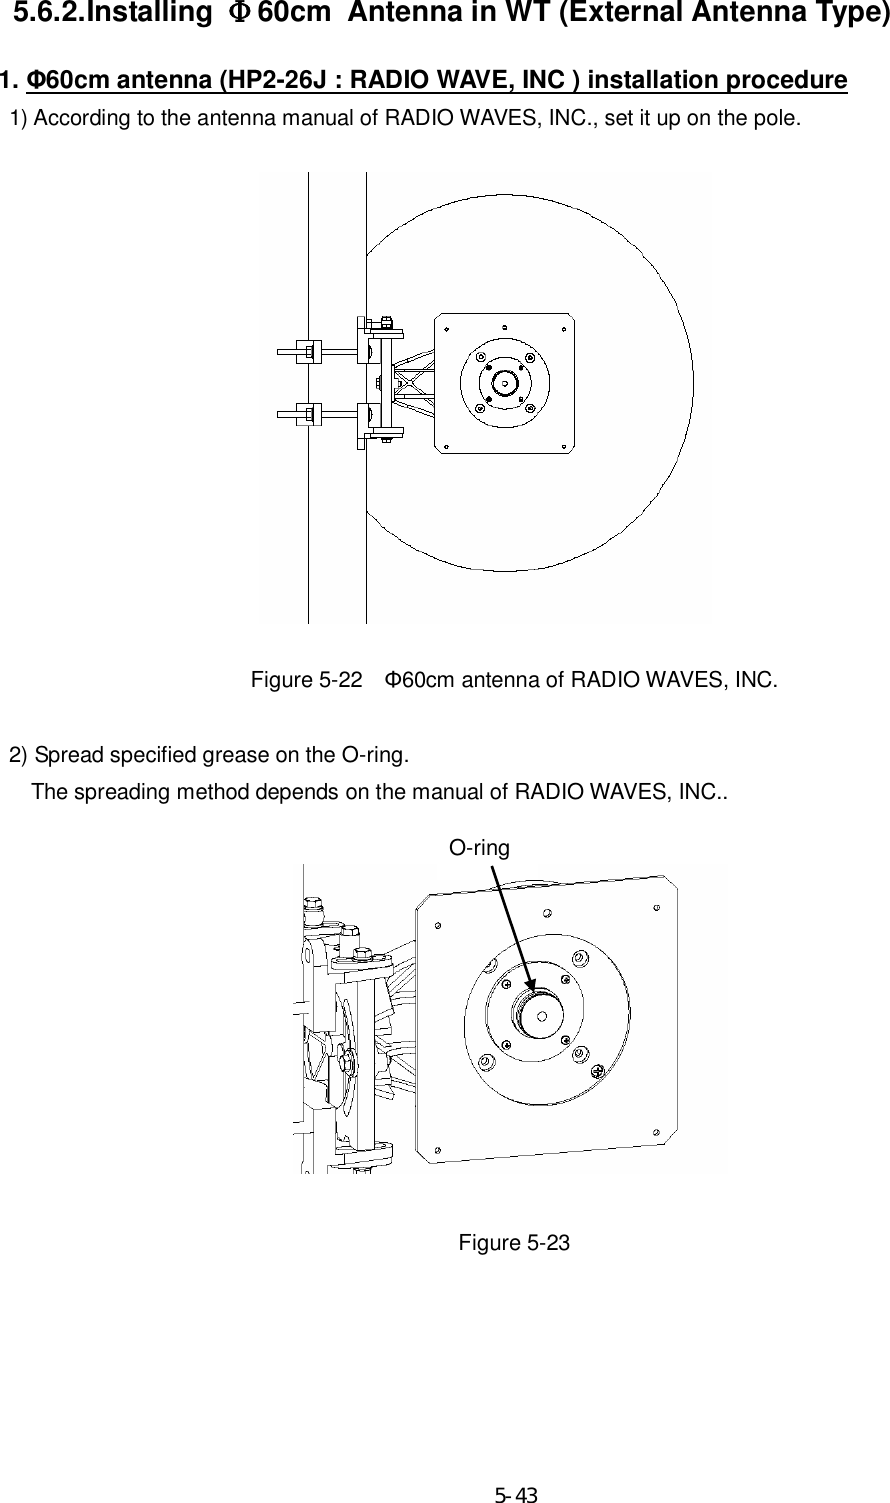     5-43 5.6.2. Installing  Φ60cm Antenna in WT (External Antenna Type) 1. Φ60cm antenna (HP2-26J : RADIO WAVE, INC ) installation procedure 1) According to the antenna manual of RADIO WAVES, INC., set it up on the pole.                 Figure 5-22    Φ60cm antenna of RADIO WAVES, INC.    2) Spread specified grease on the O-ring.       The spreading method depends on the manual of RADIO WAVES, INC..                                                                                    Figure 5-23     O-ring 